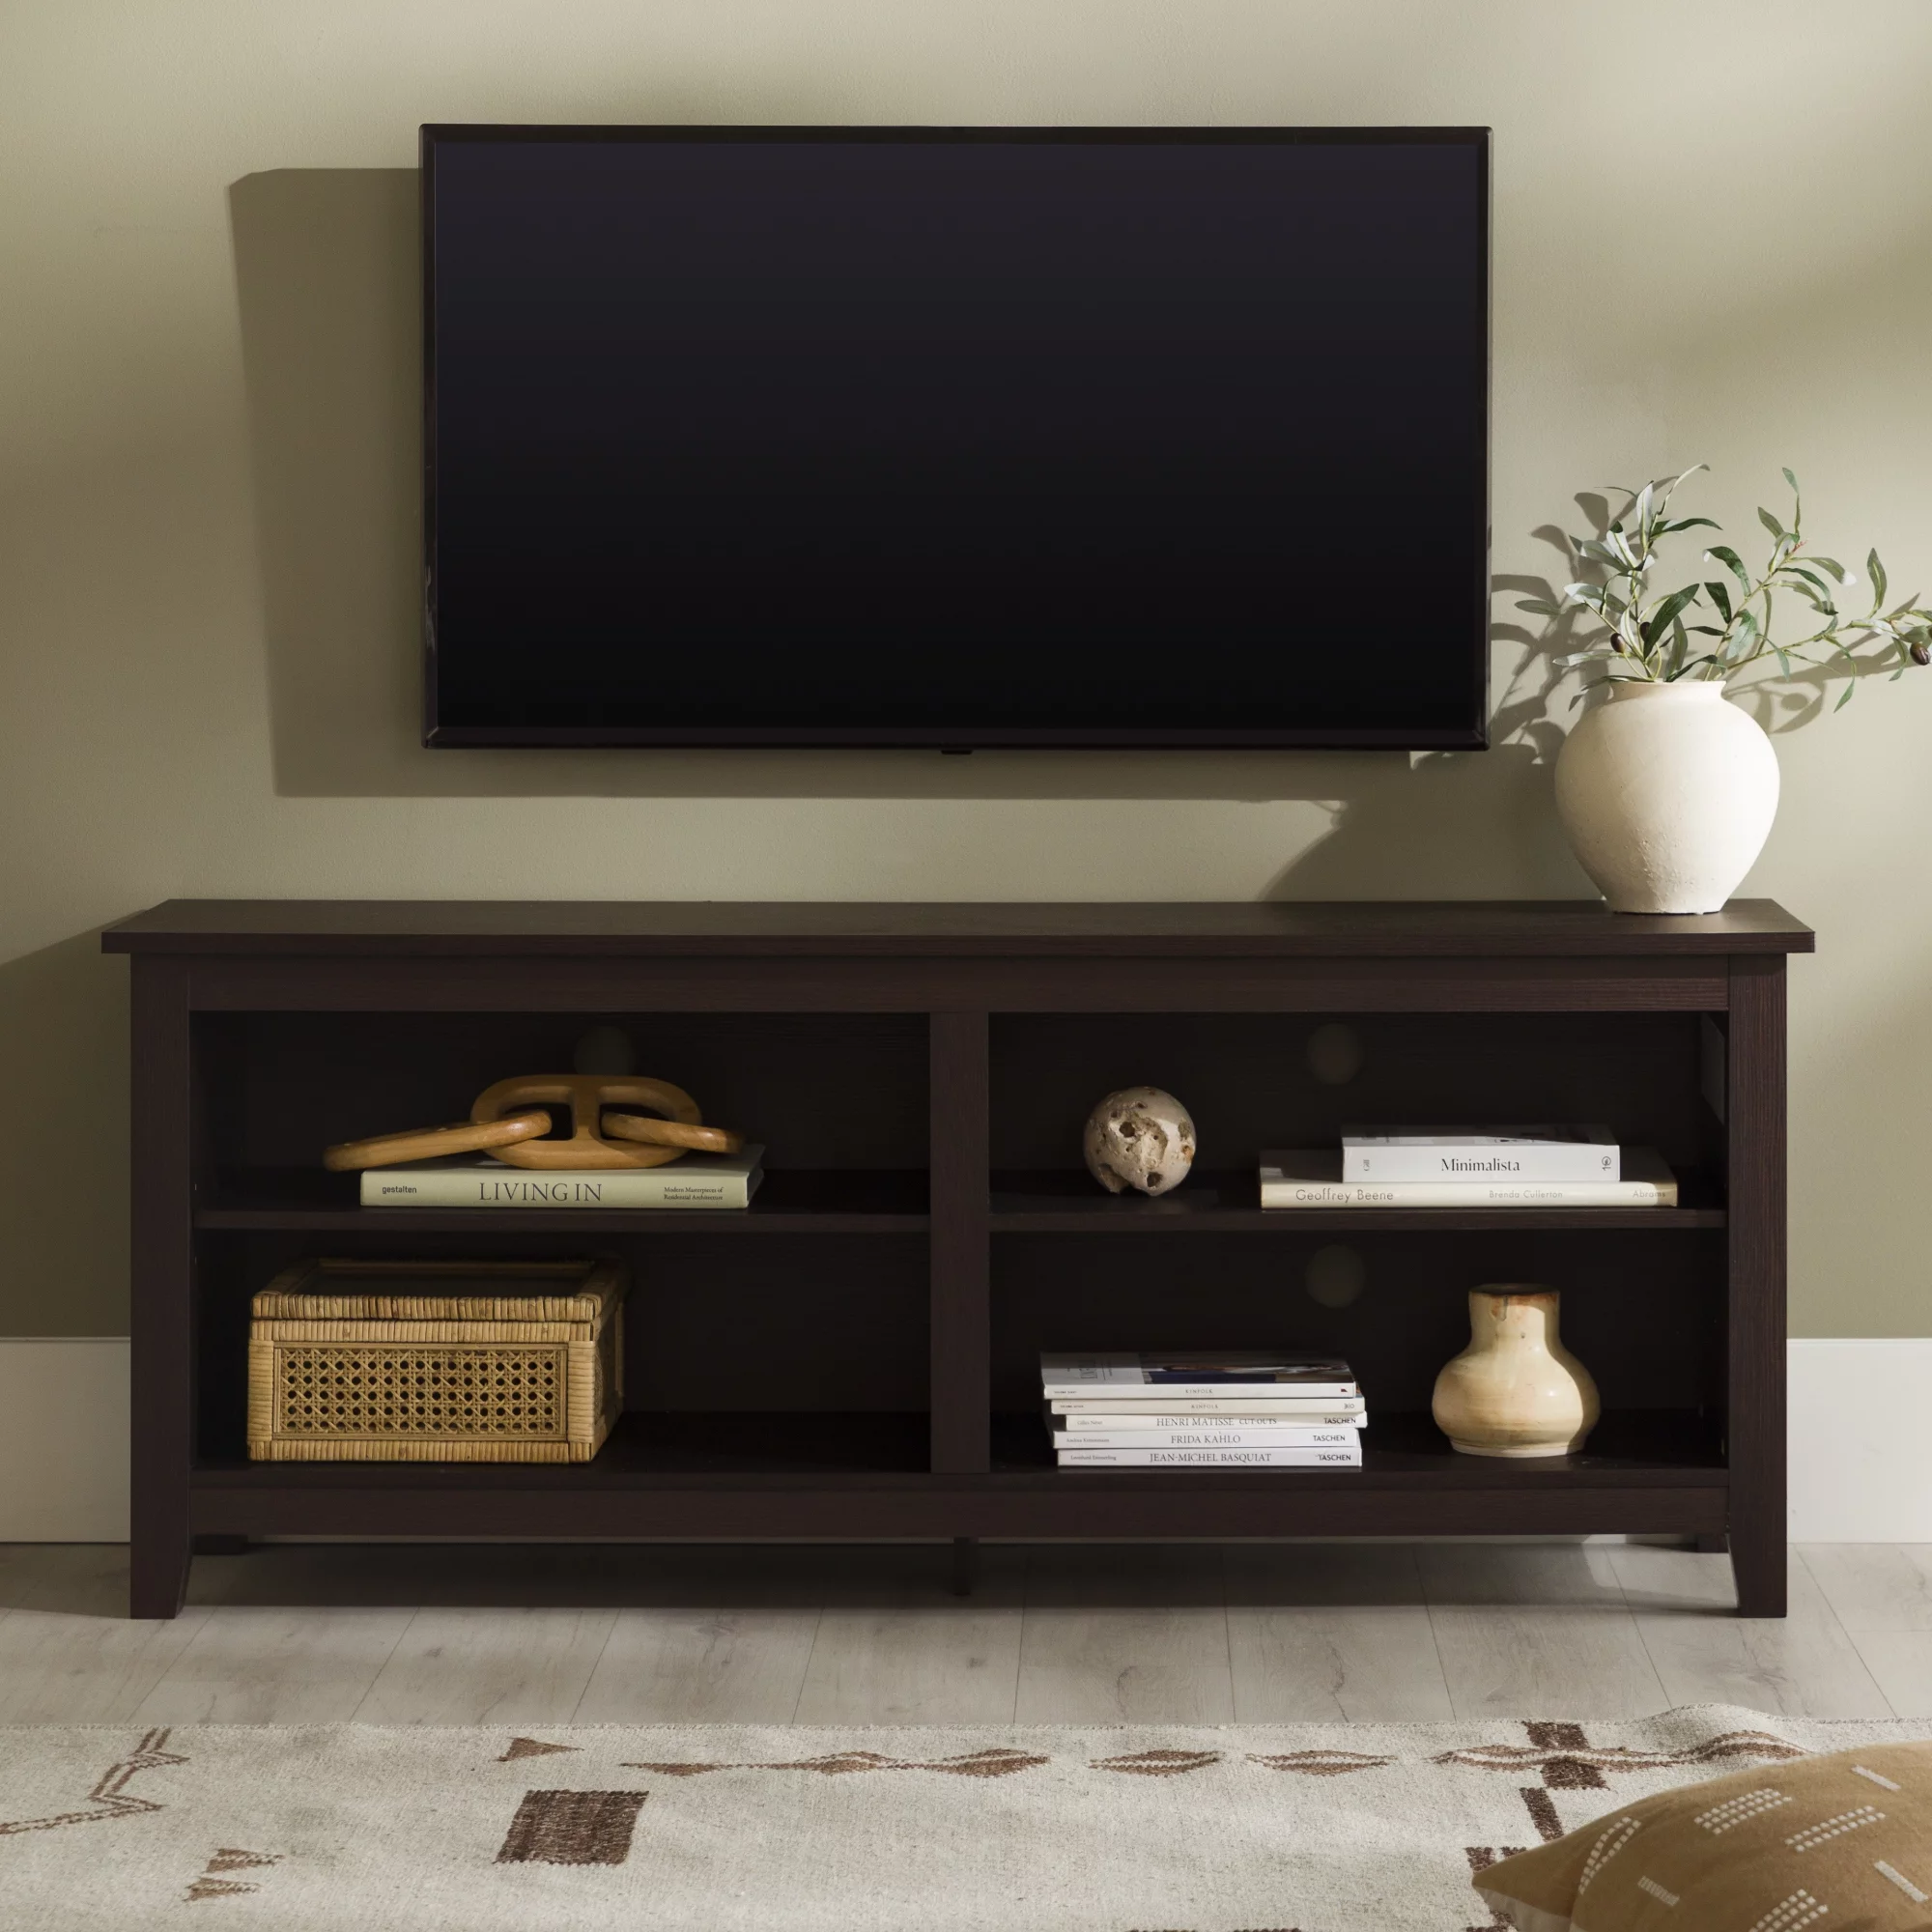 Manor Park Open Storage TV Stand for TVs up to 65", Espresso